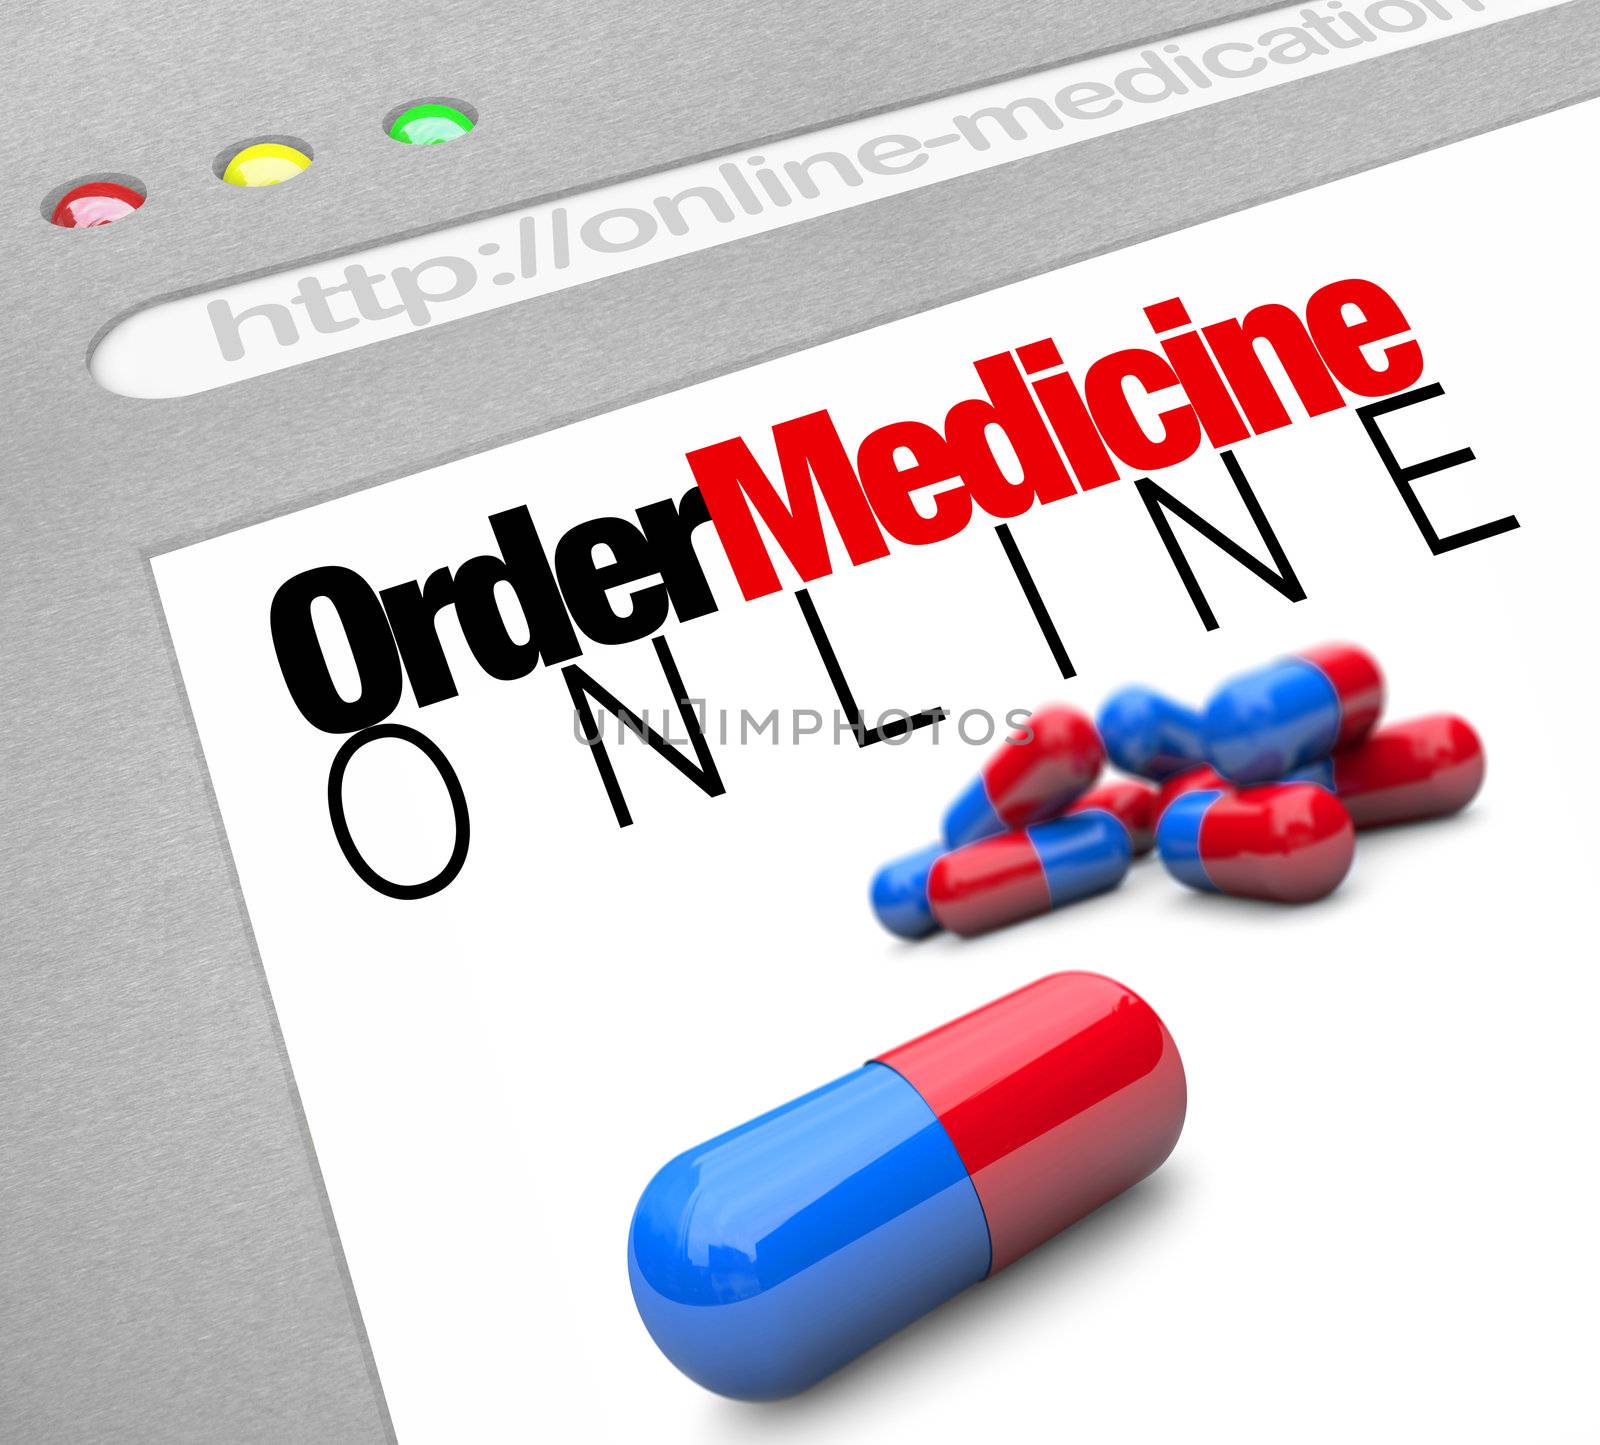 A web browser window shows the words Order Medicine Online and a picture of some capsule pills, symbolizing the ease and savings one can experience when ordering or refilling prescription medication on the internet